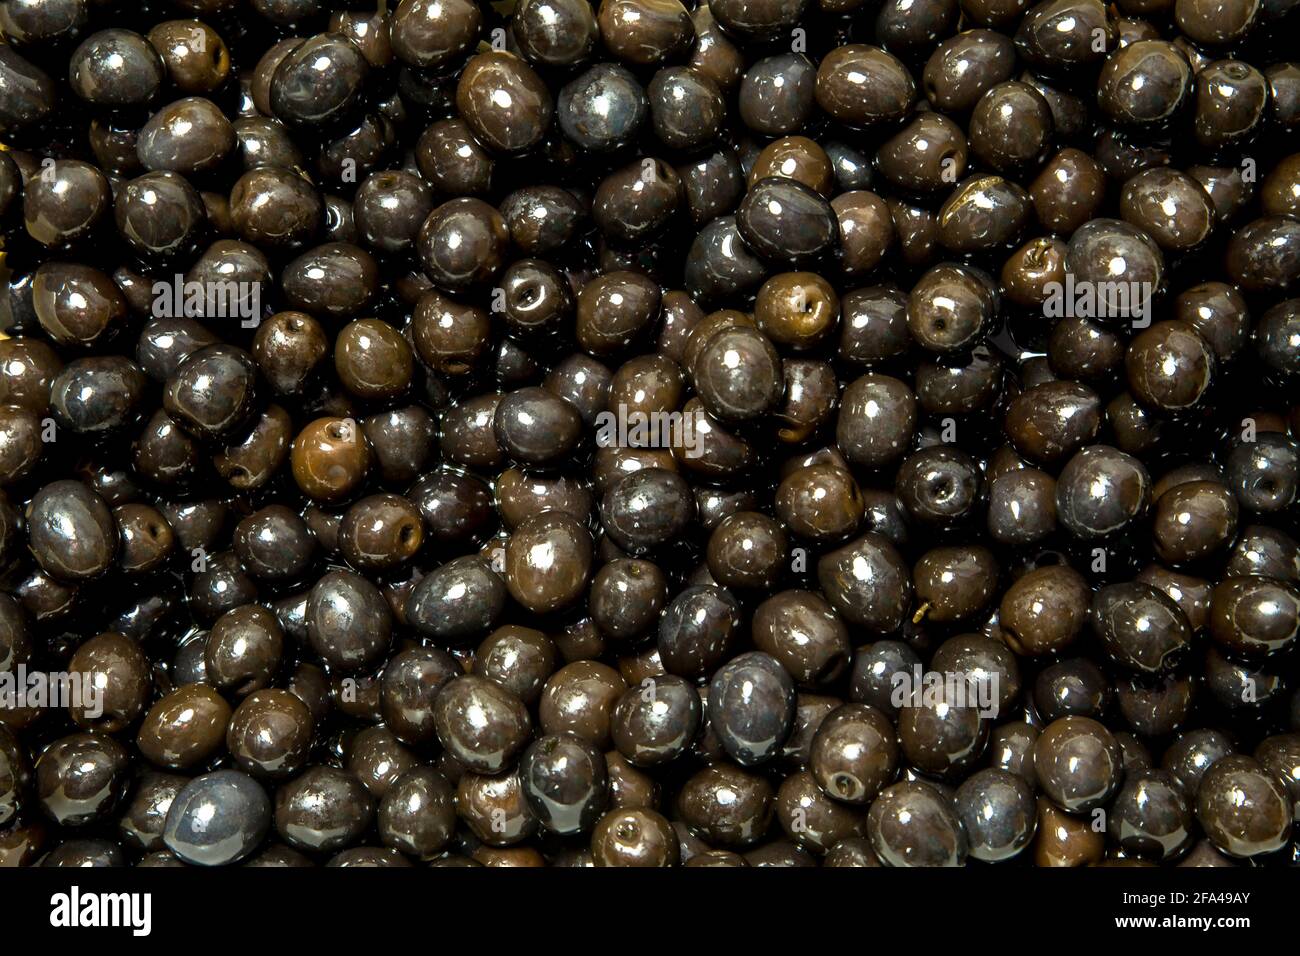 Awesome black olives in water Stock Photo